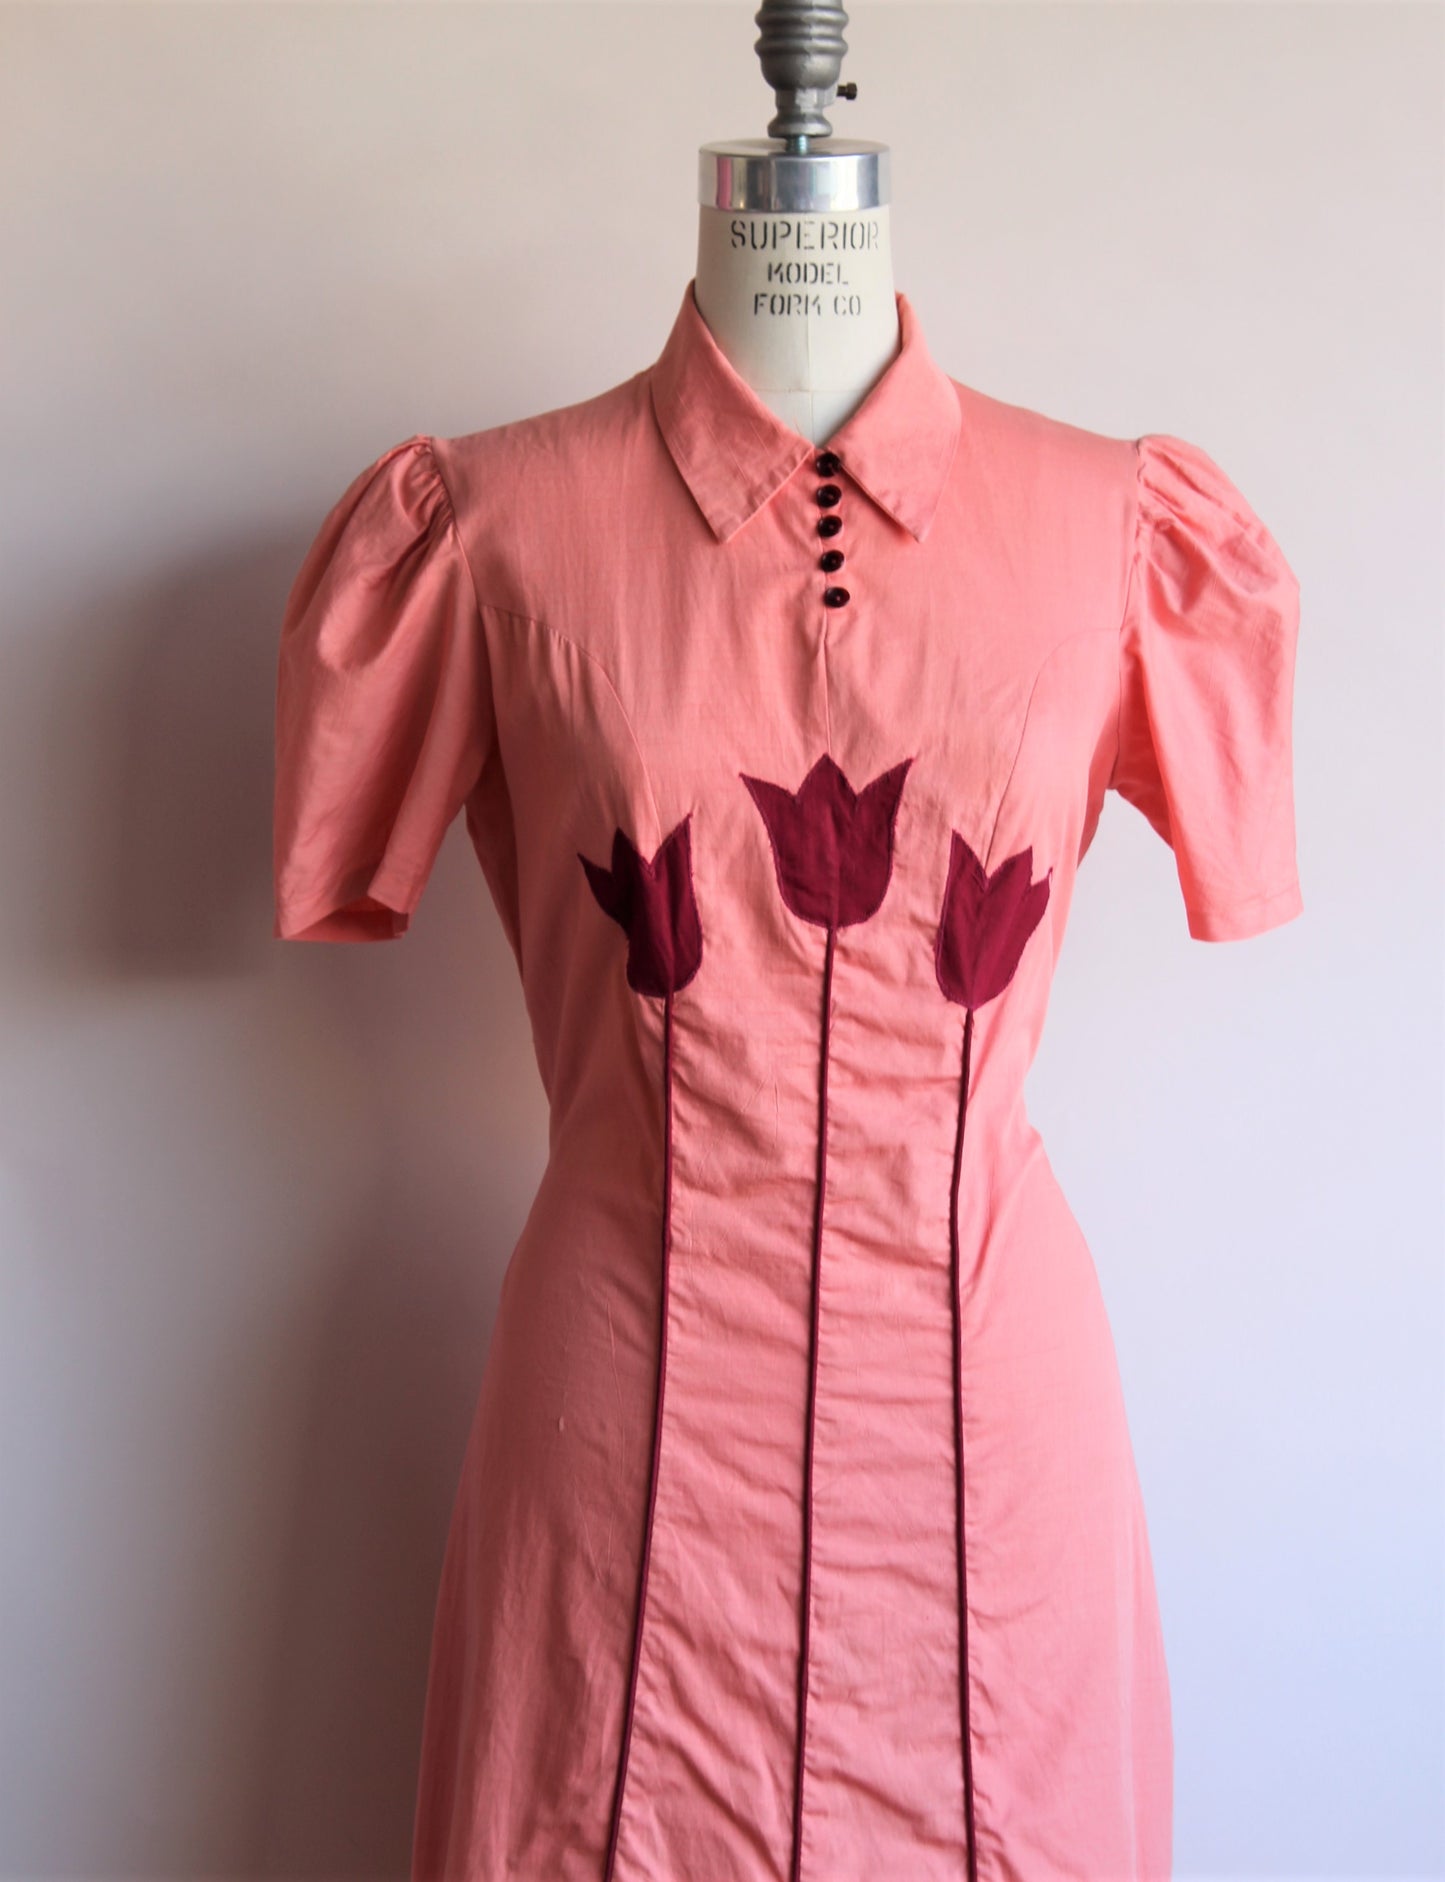 Vintage 1950s Peach Dress with Tulips